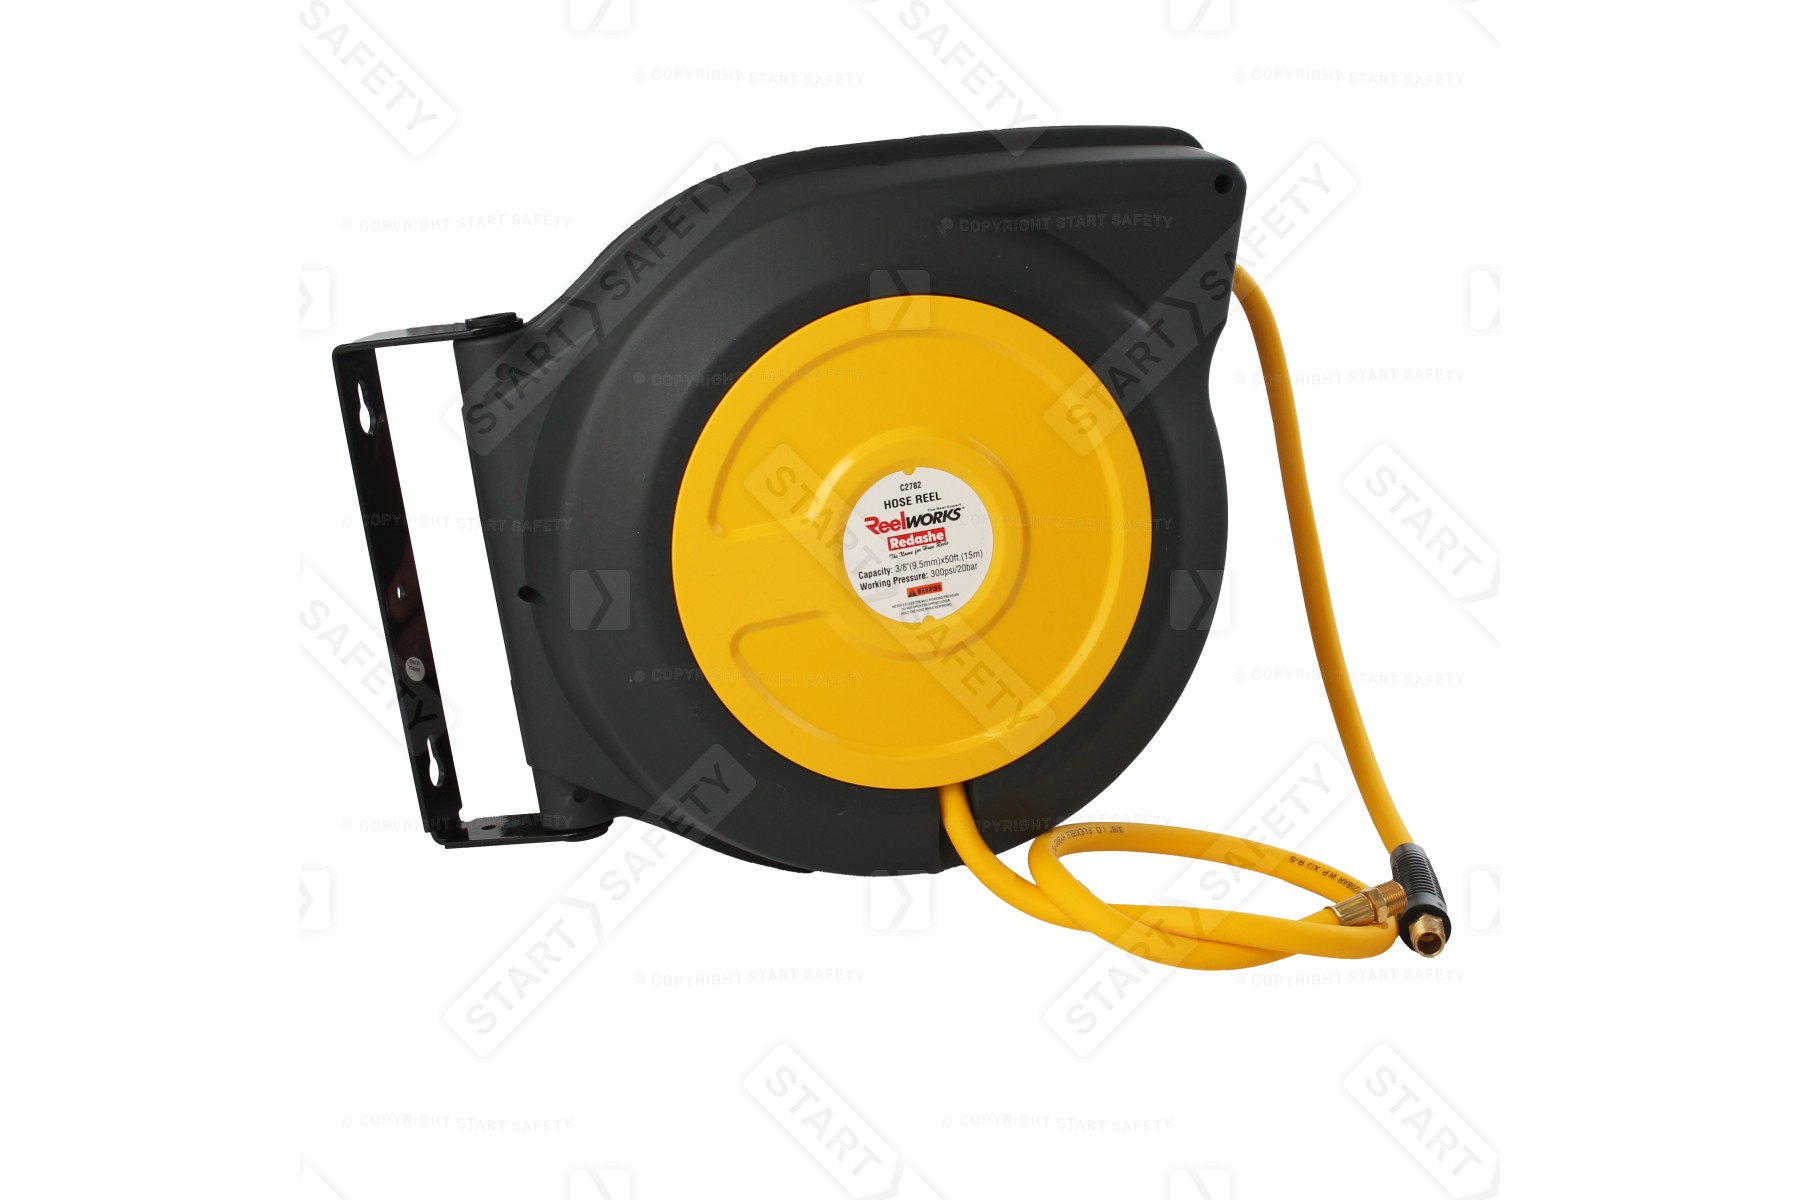 https://startsafety.uk/image/cache/cache/13001-14000/13579/main/f414-reelworks-retractable-hose-reel-yellow-15m-main-0-1-1800x1200.jpg